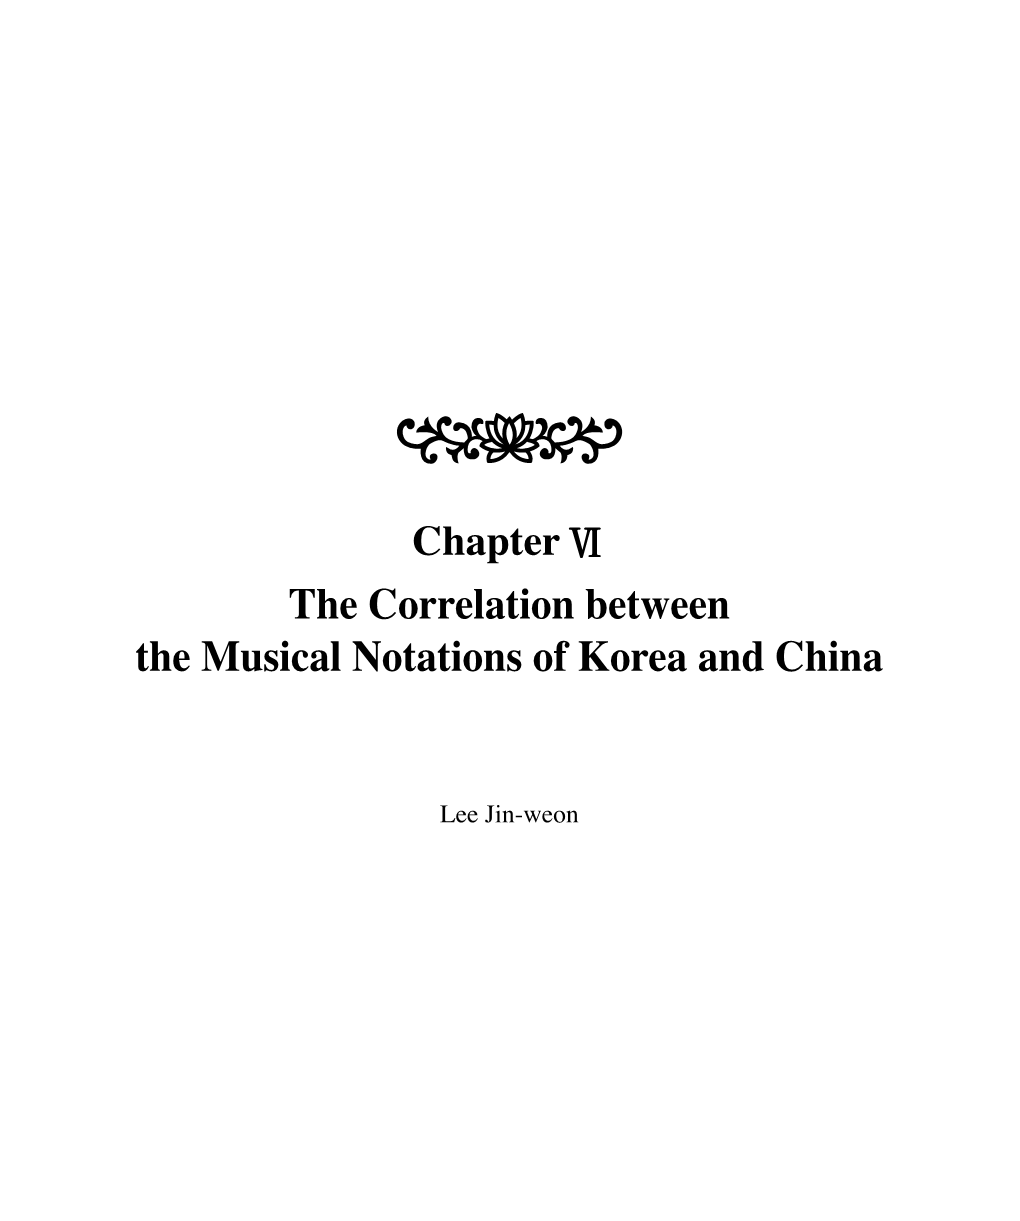 The Correlation Between the Musical Notations of Korea and China